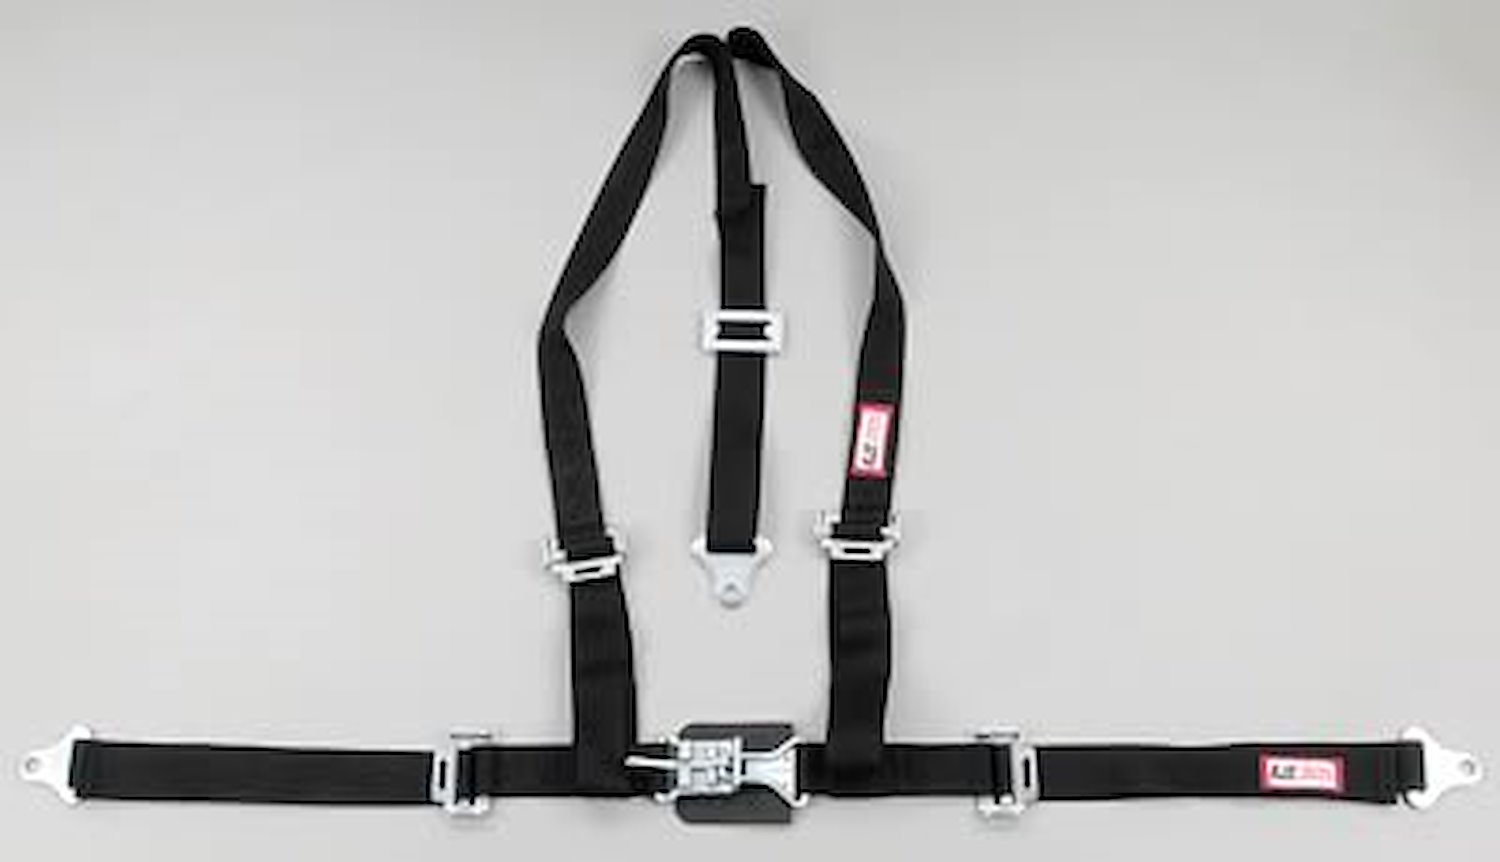 NON-SFI L&L HARNESS 2 PULL DOWN Lap Belt SNAP SEWN IN 2 S.H. INDIVIDUAL FLOOR Mount w/STERNUM STRAP WRAP/SNAP GRAY